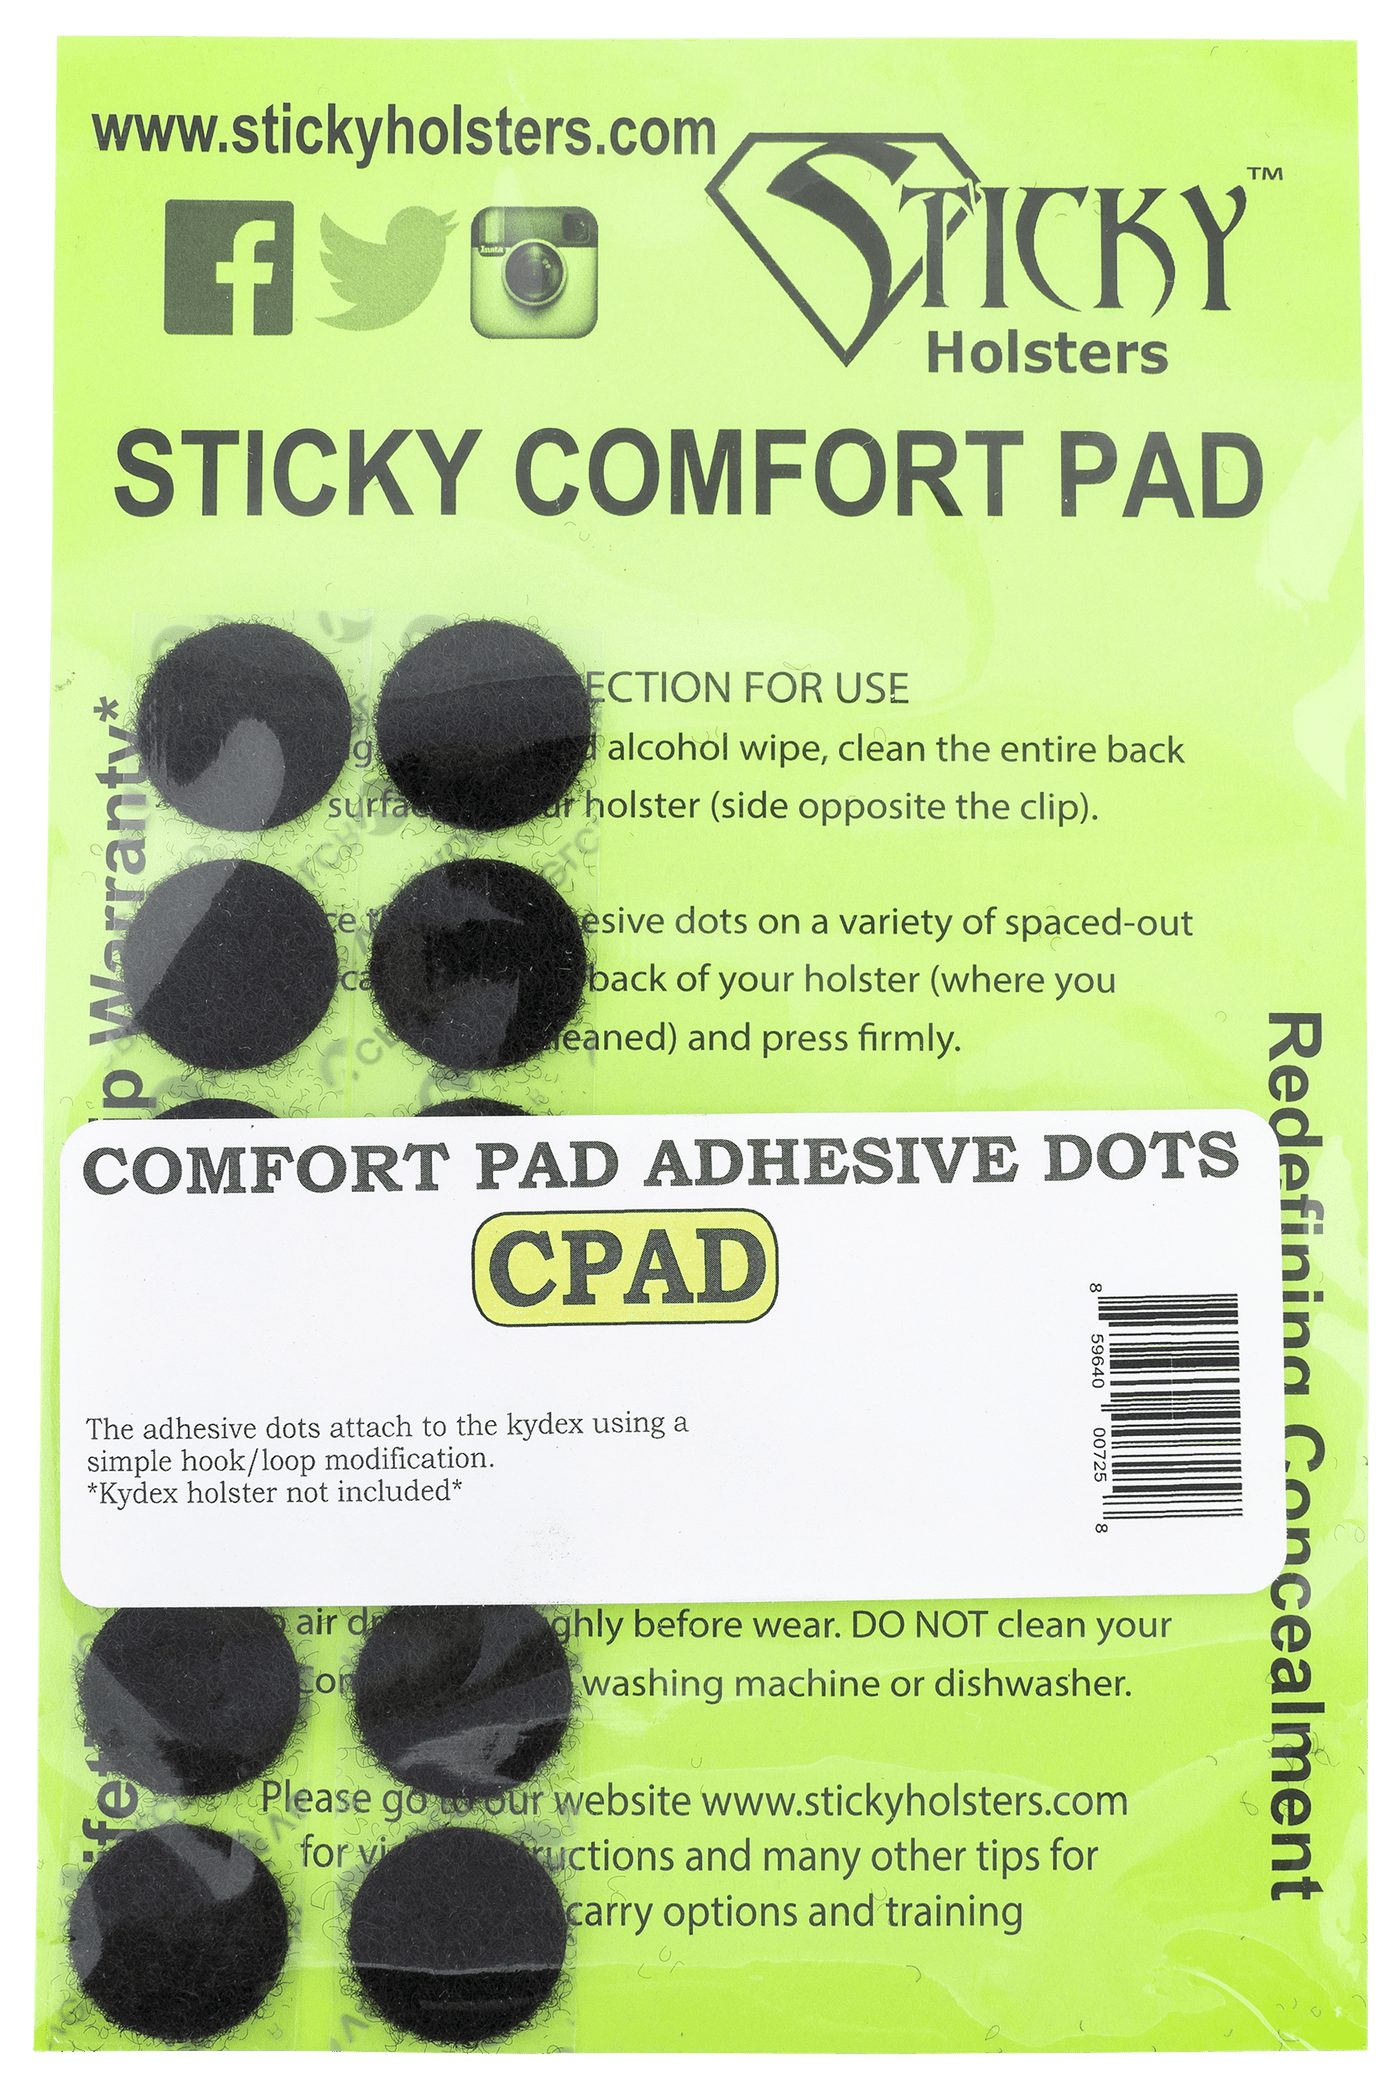 Sticky Holsters Sticky Holsters Comfort Pad, Sticky Comfort Pad Adhesive Loop Dots Firearm Accessories